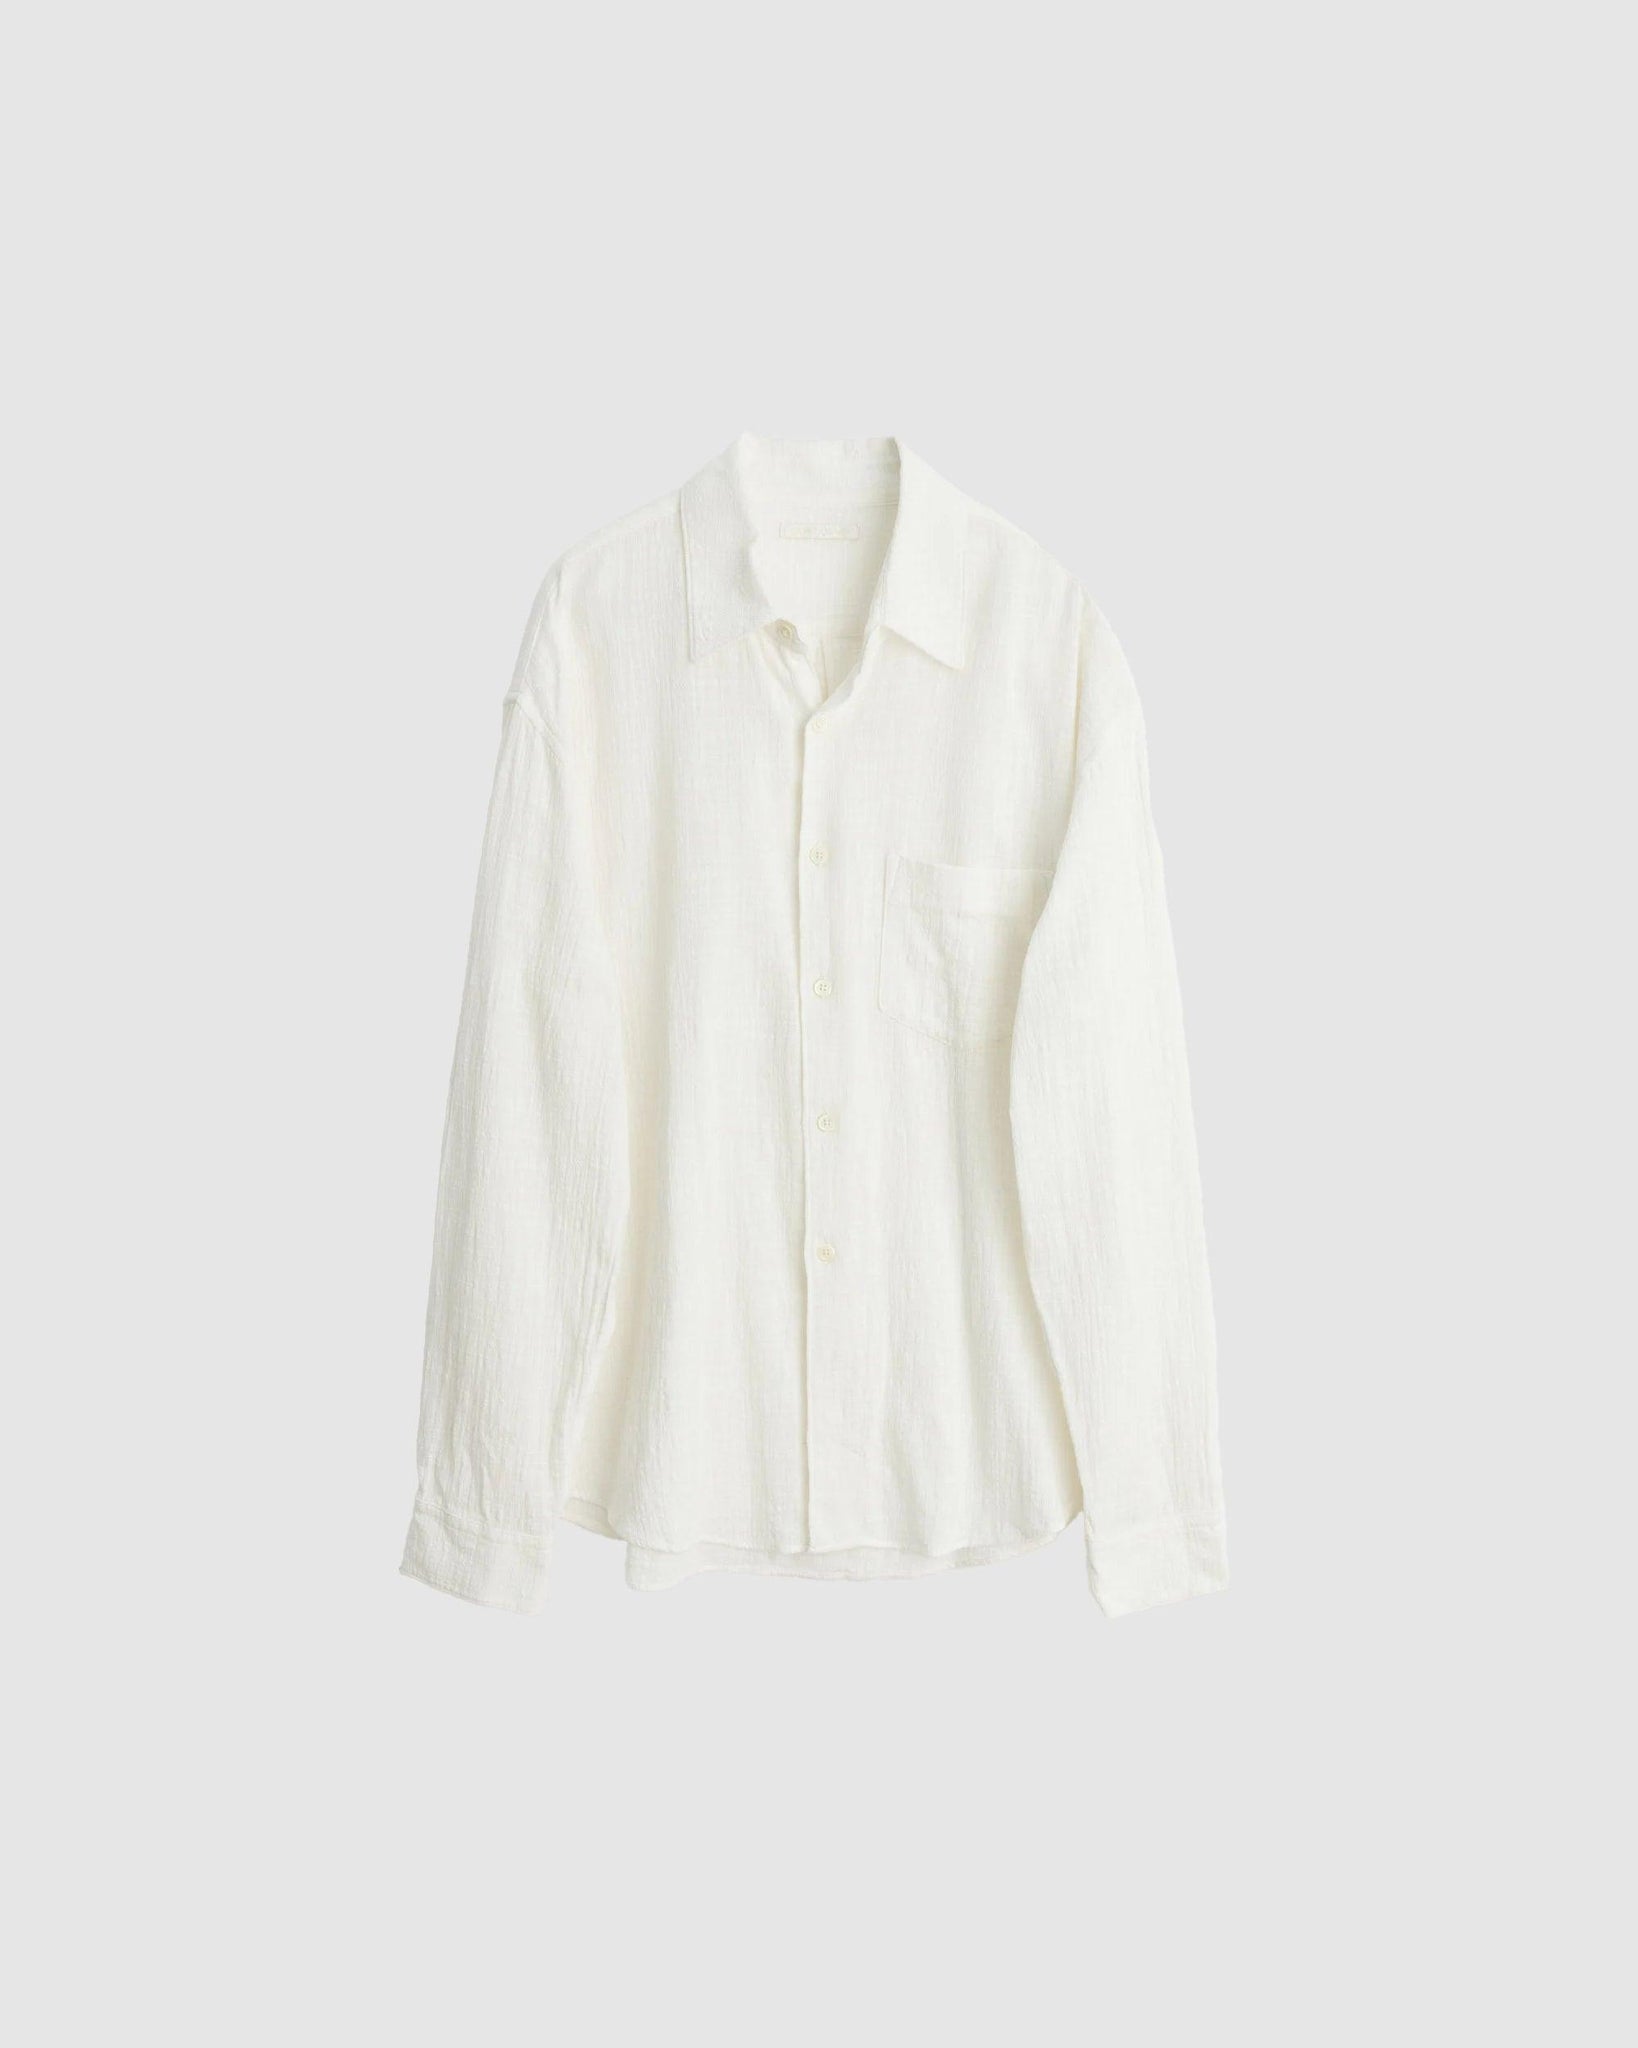 Coco Shirt - {{ collection.title }} - Chinatown Country Club 